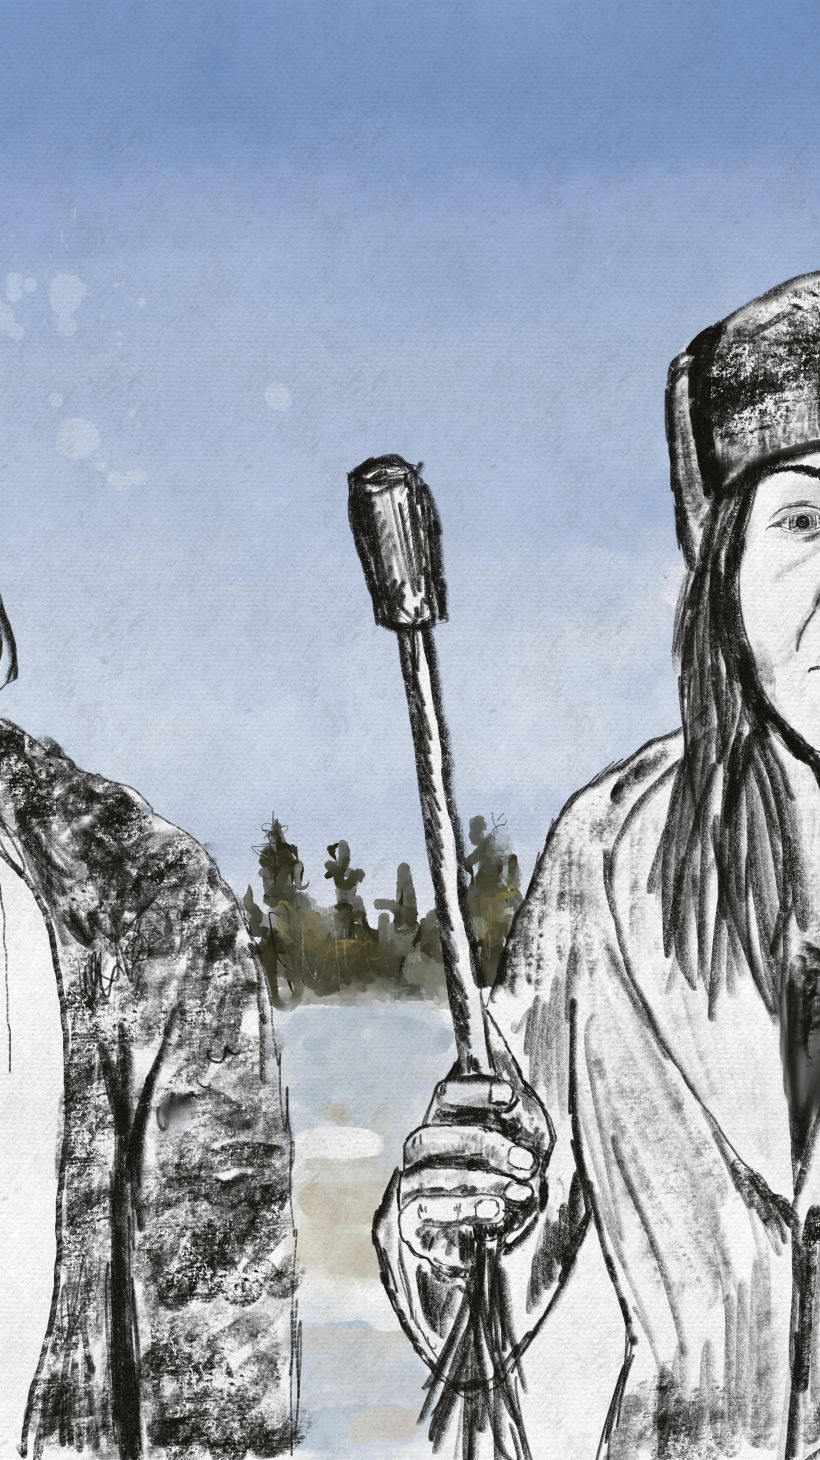 An illustration shows land defenders Sabina Dennis and her sister. Sabina is holding a frame drum. There are fir trees in the background and snow on the ground.